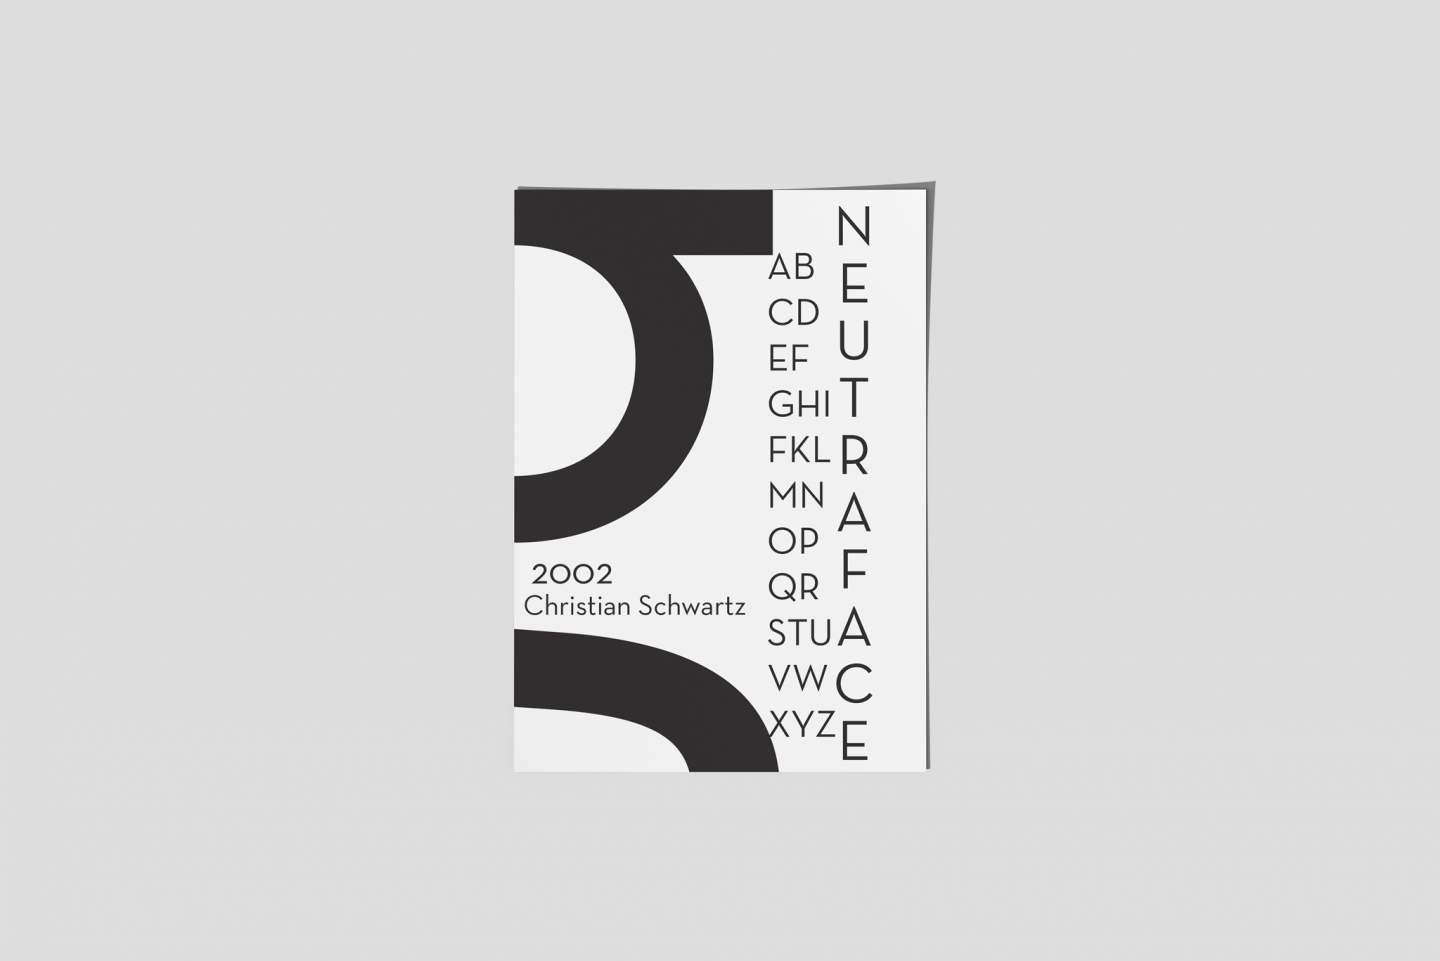 Neutraface Type Posters